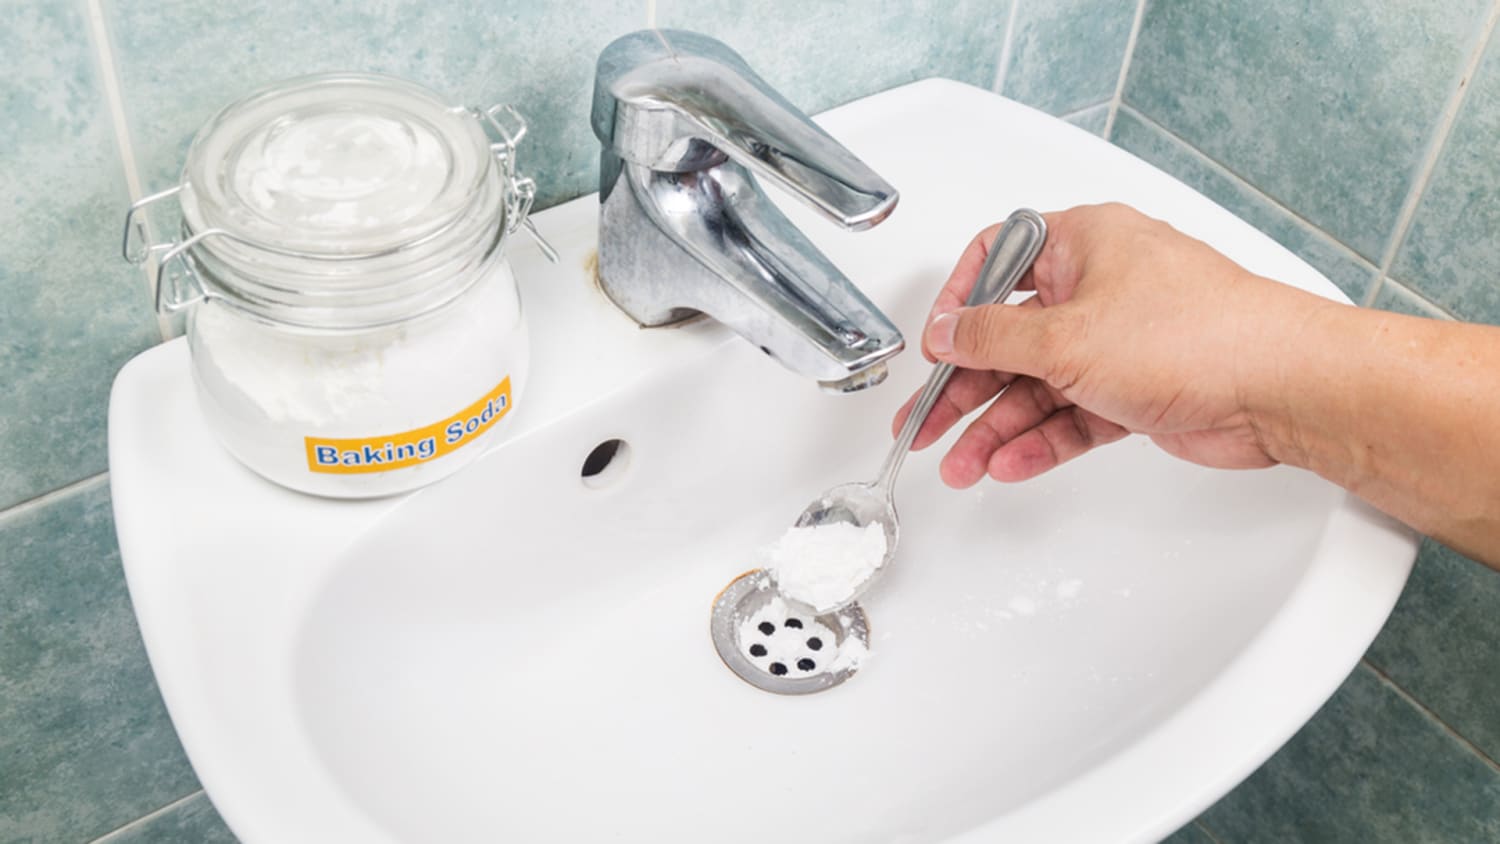 Unclog A Drain Without Calling Plumber, How To Clear Blocked Bathroom Sink Drain